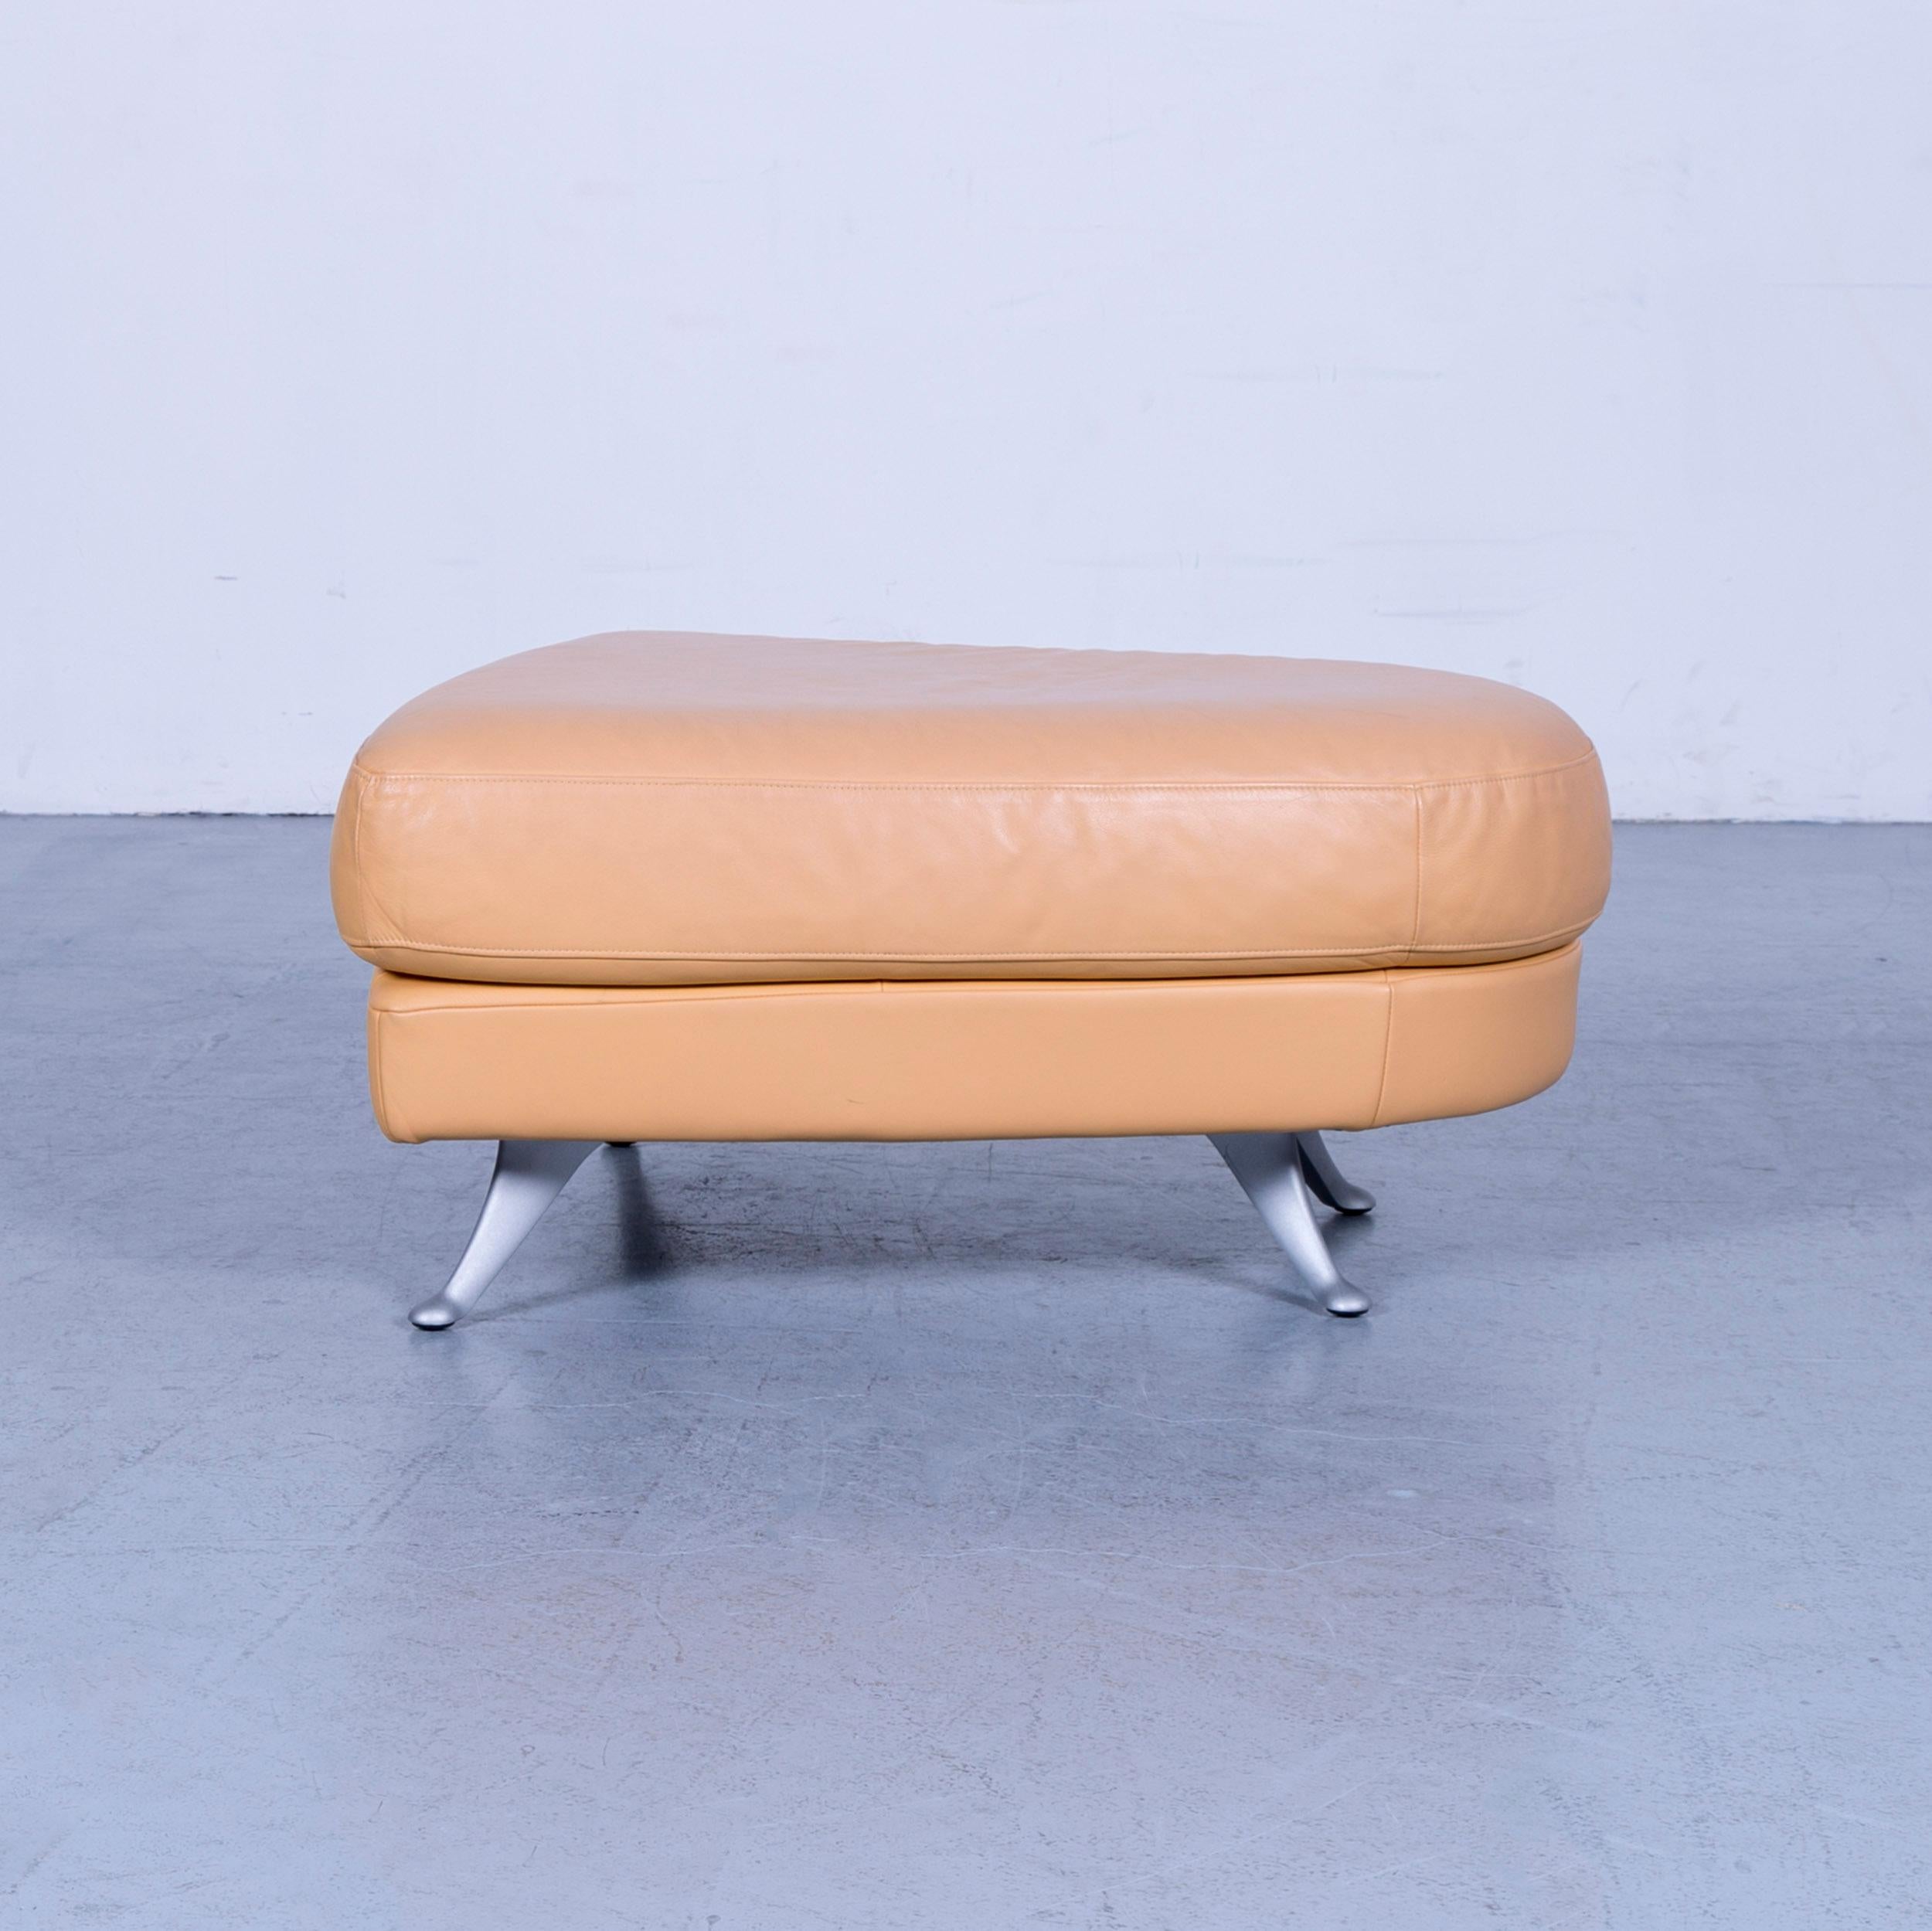 We bring to you an Rolf Benz designer leather foot-stool beige bench.



























